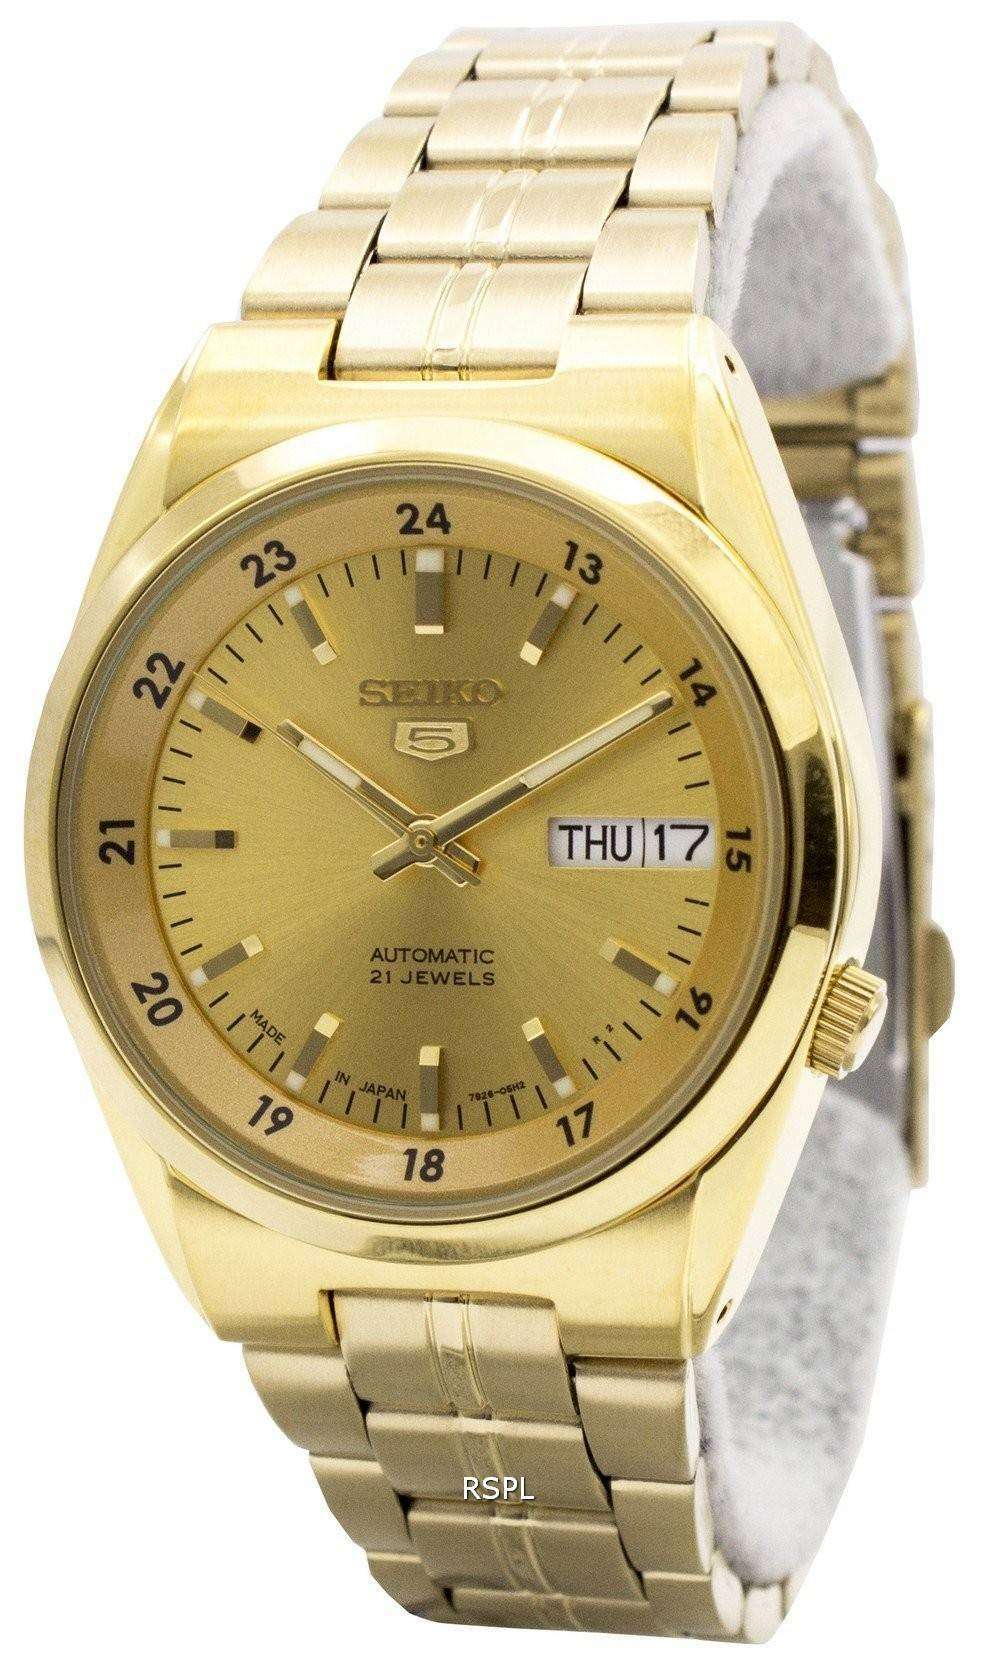 A stunning jewel watch in gold color set with Zirconia stones